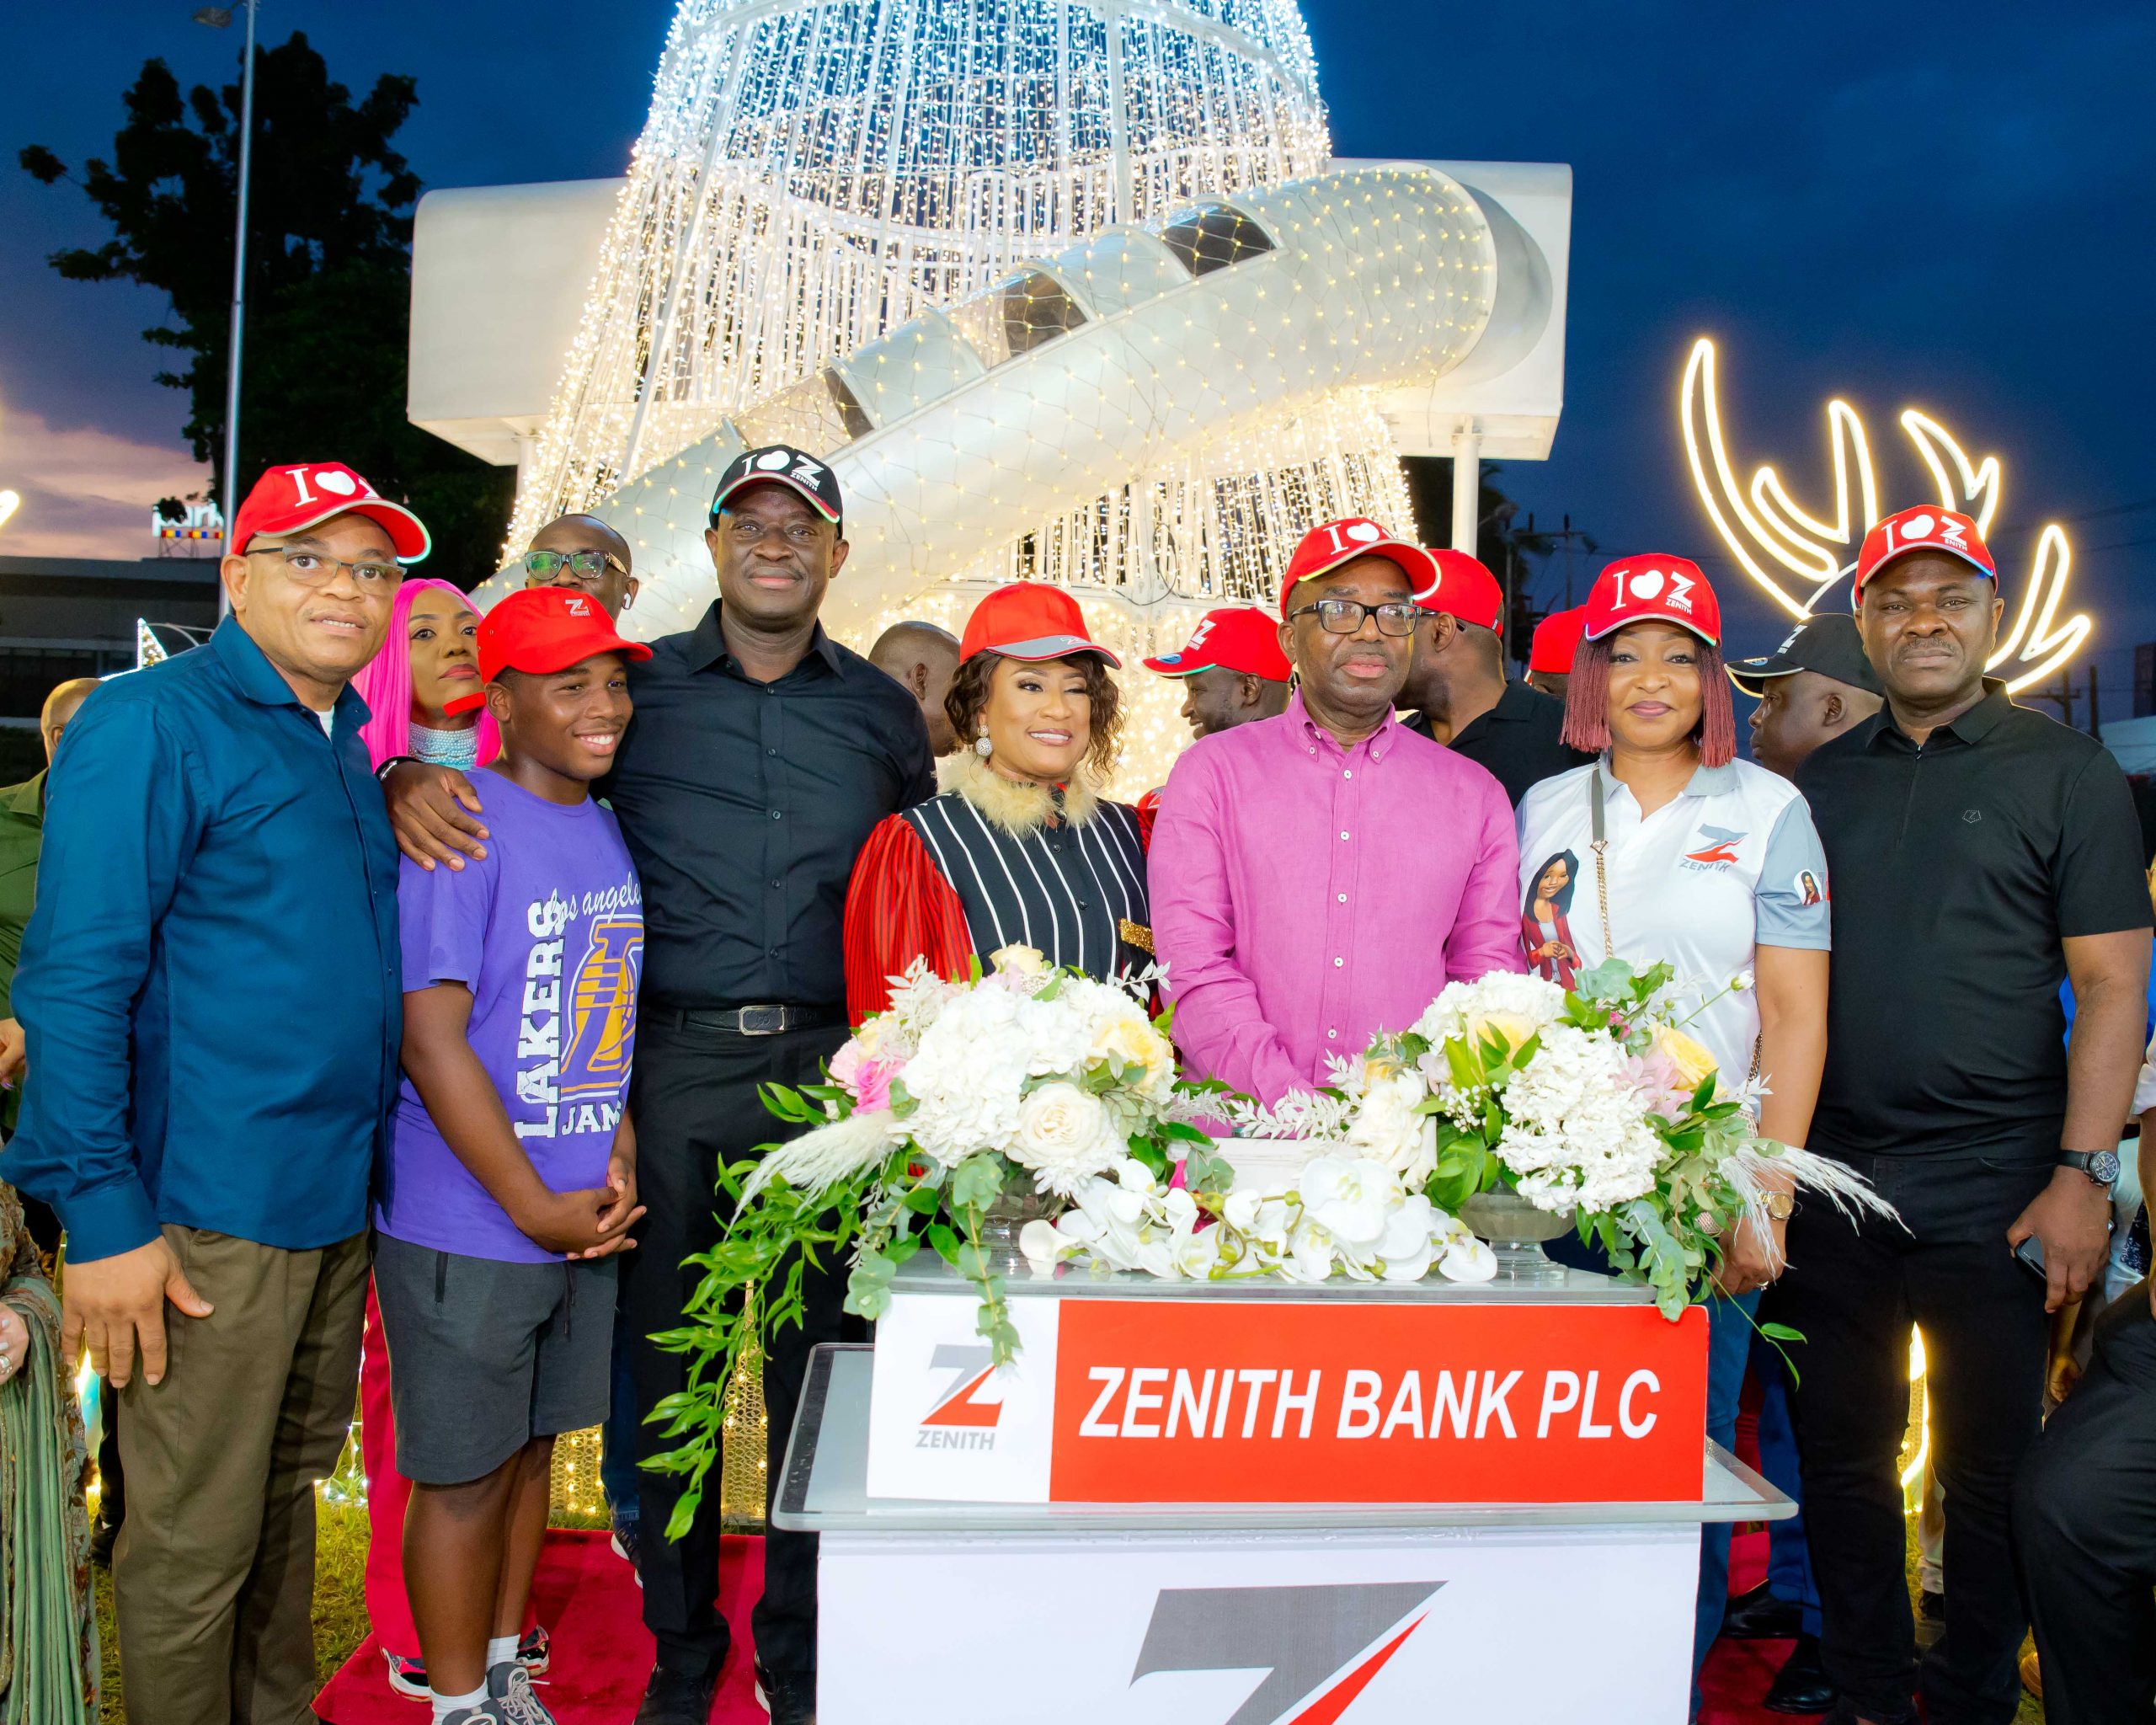 ZENITH BANK ACTIVATES THE YULETIDE SEASON WITH AJOSE ADEOGUN STREET CHRISTMAS LIGHT-UP